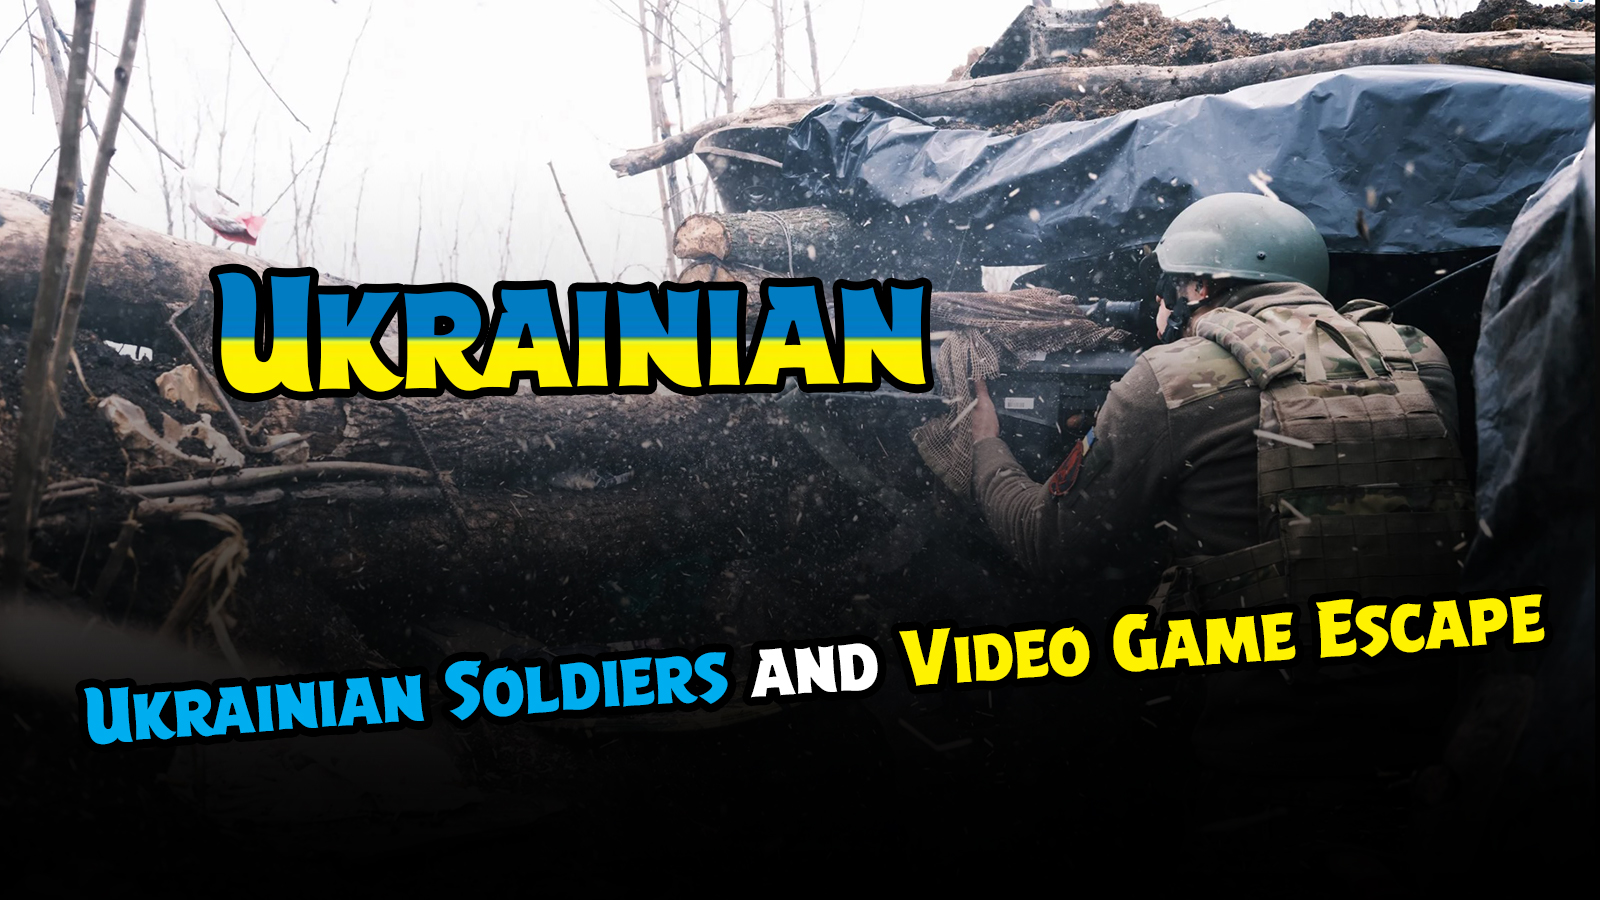 World of Tanks: A Virtual Refuge for Ukranian Soldiers on the Front Line